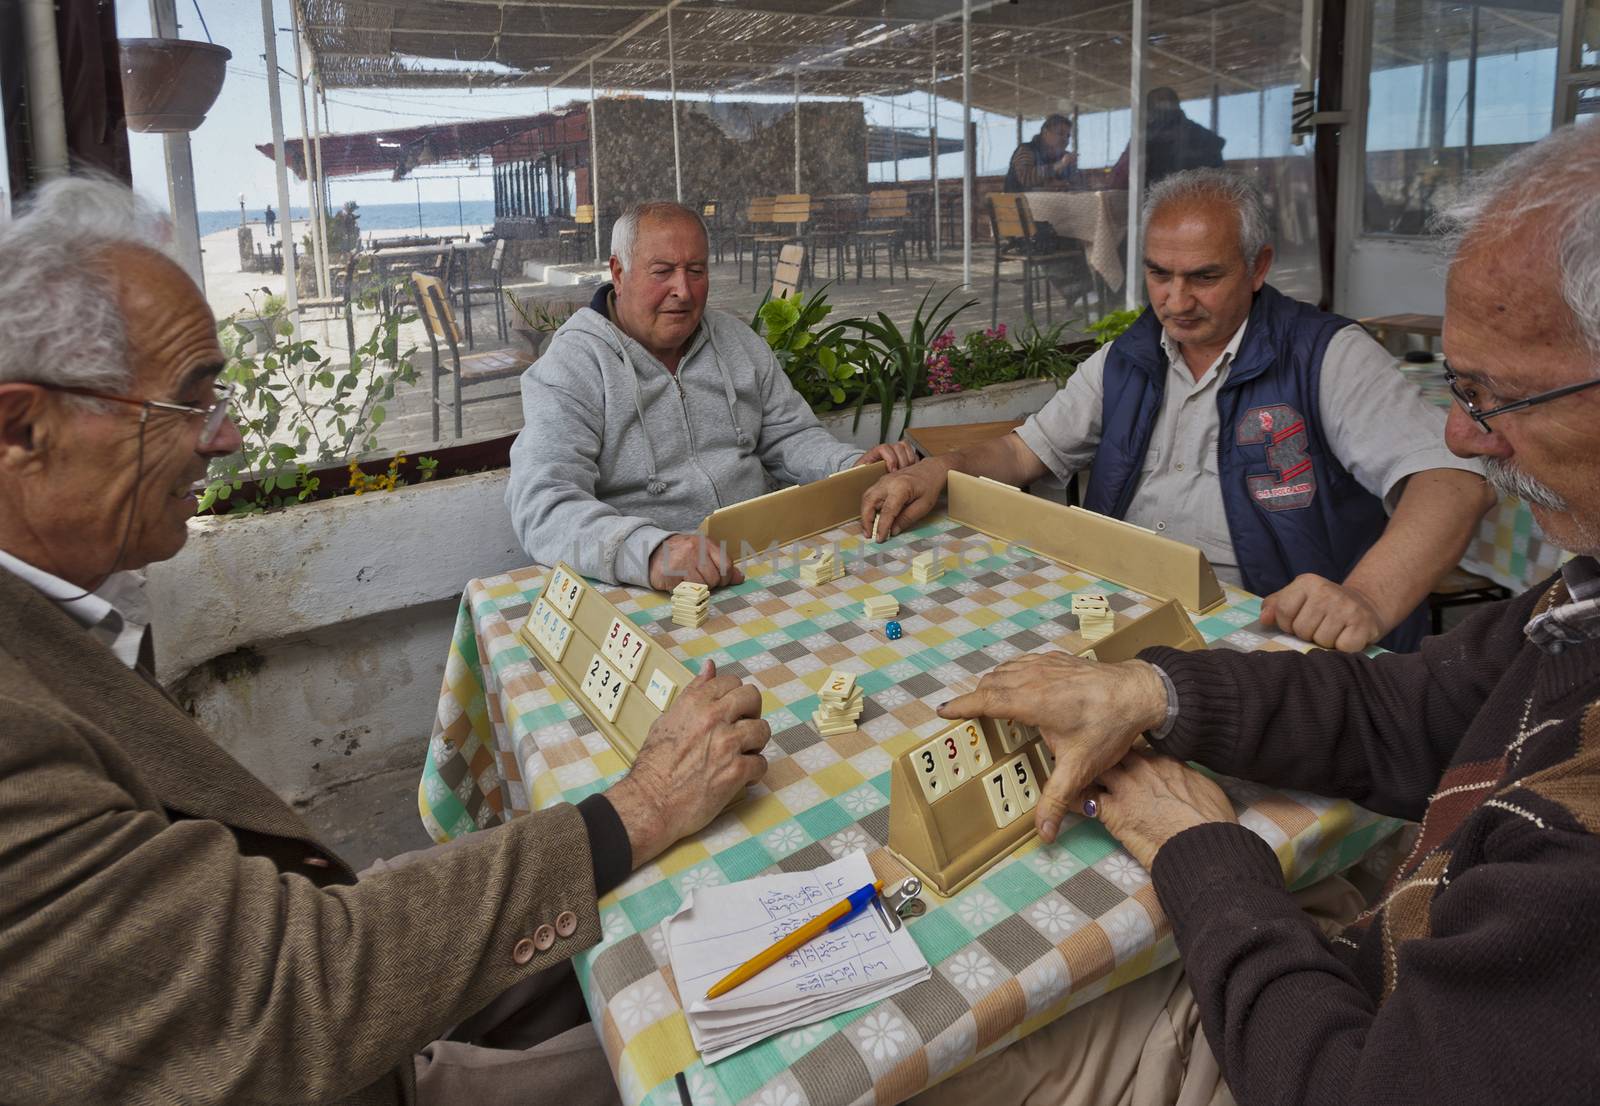 ISTANBUL, TURKEY – APRIL 23: Unidenified men playing a tile game near the seaside prior to Anzac Day on April 25, 2012 in Istanbul, Turkey. 